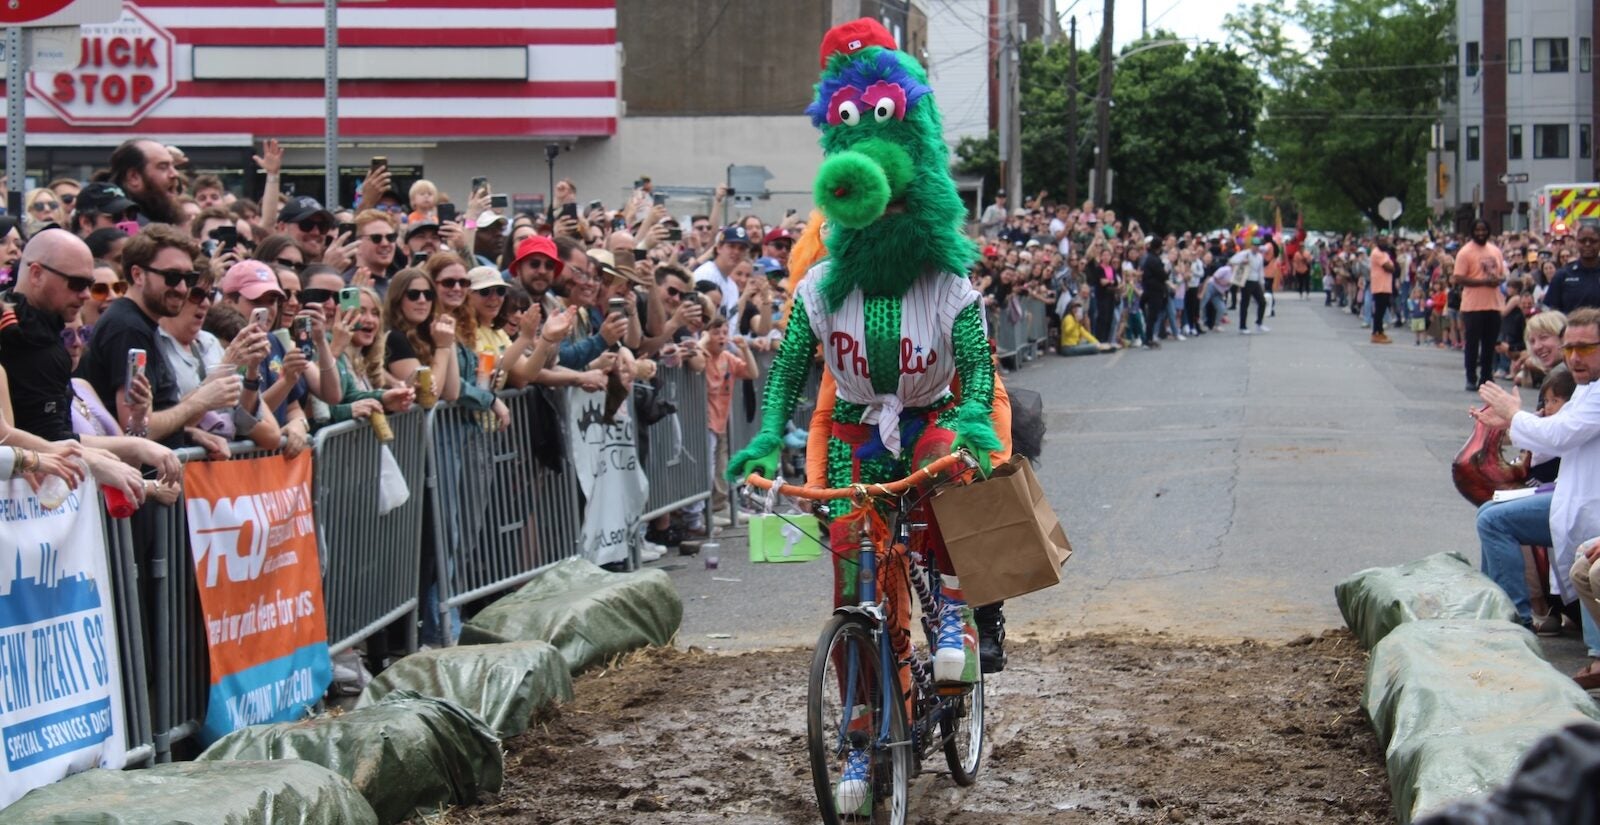 A glamorous Gritty and Phillie Phanatic make their way through the mud pit at the Kensington Derby